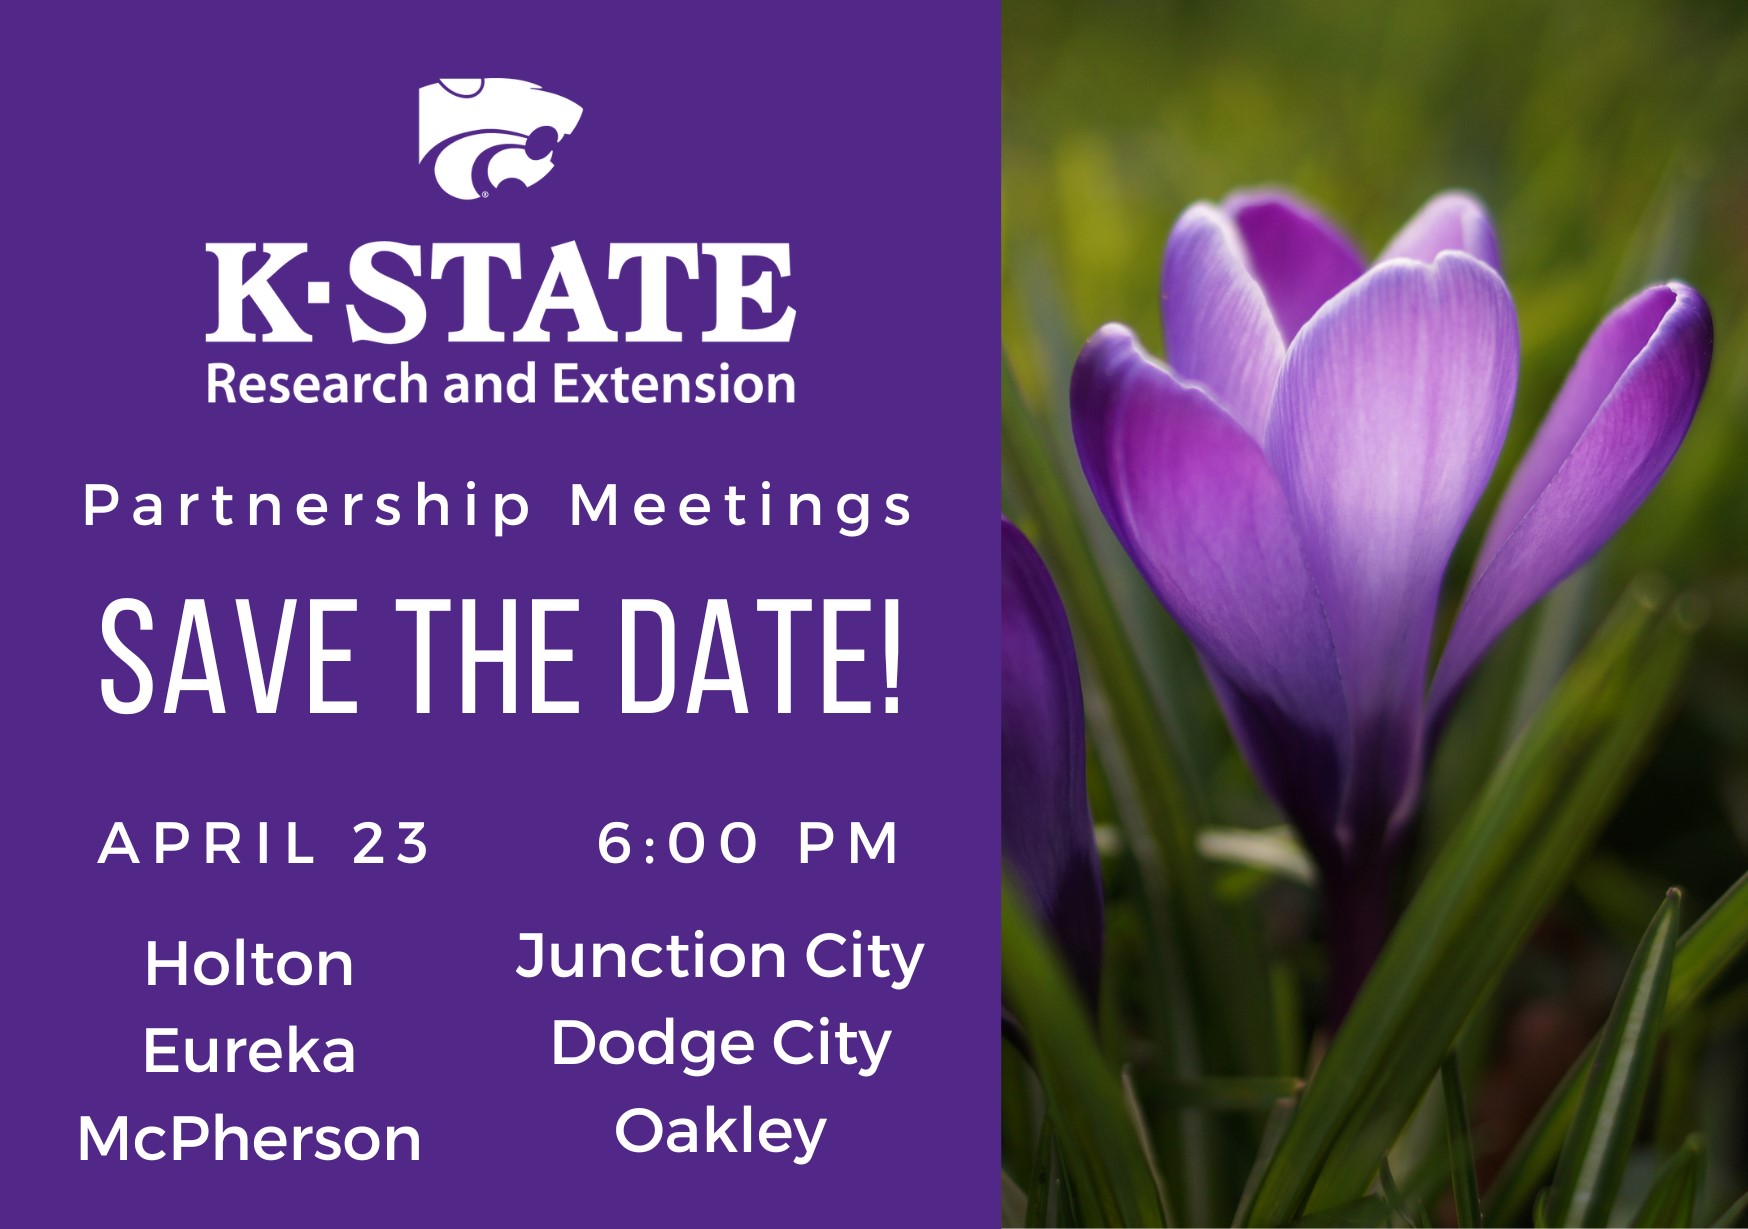 Save the Date for the upcoming K-State Research and Extension Partnership meeting.  April 23 at 6:00 in the following locations: Holton, Eureka, McPherson, Junction City, Dodge City, and Oakley.